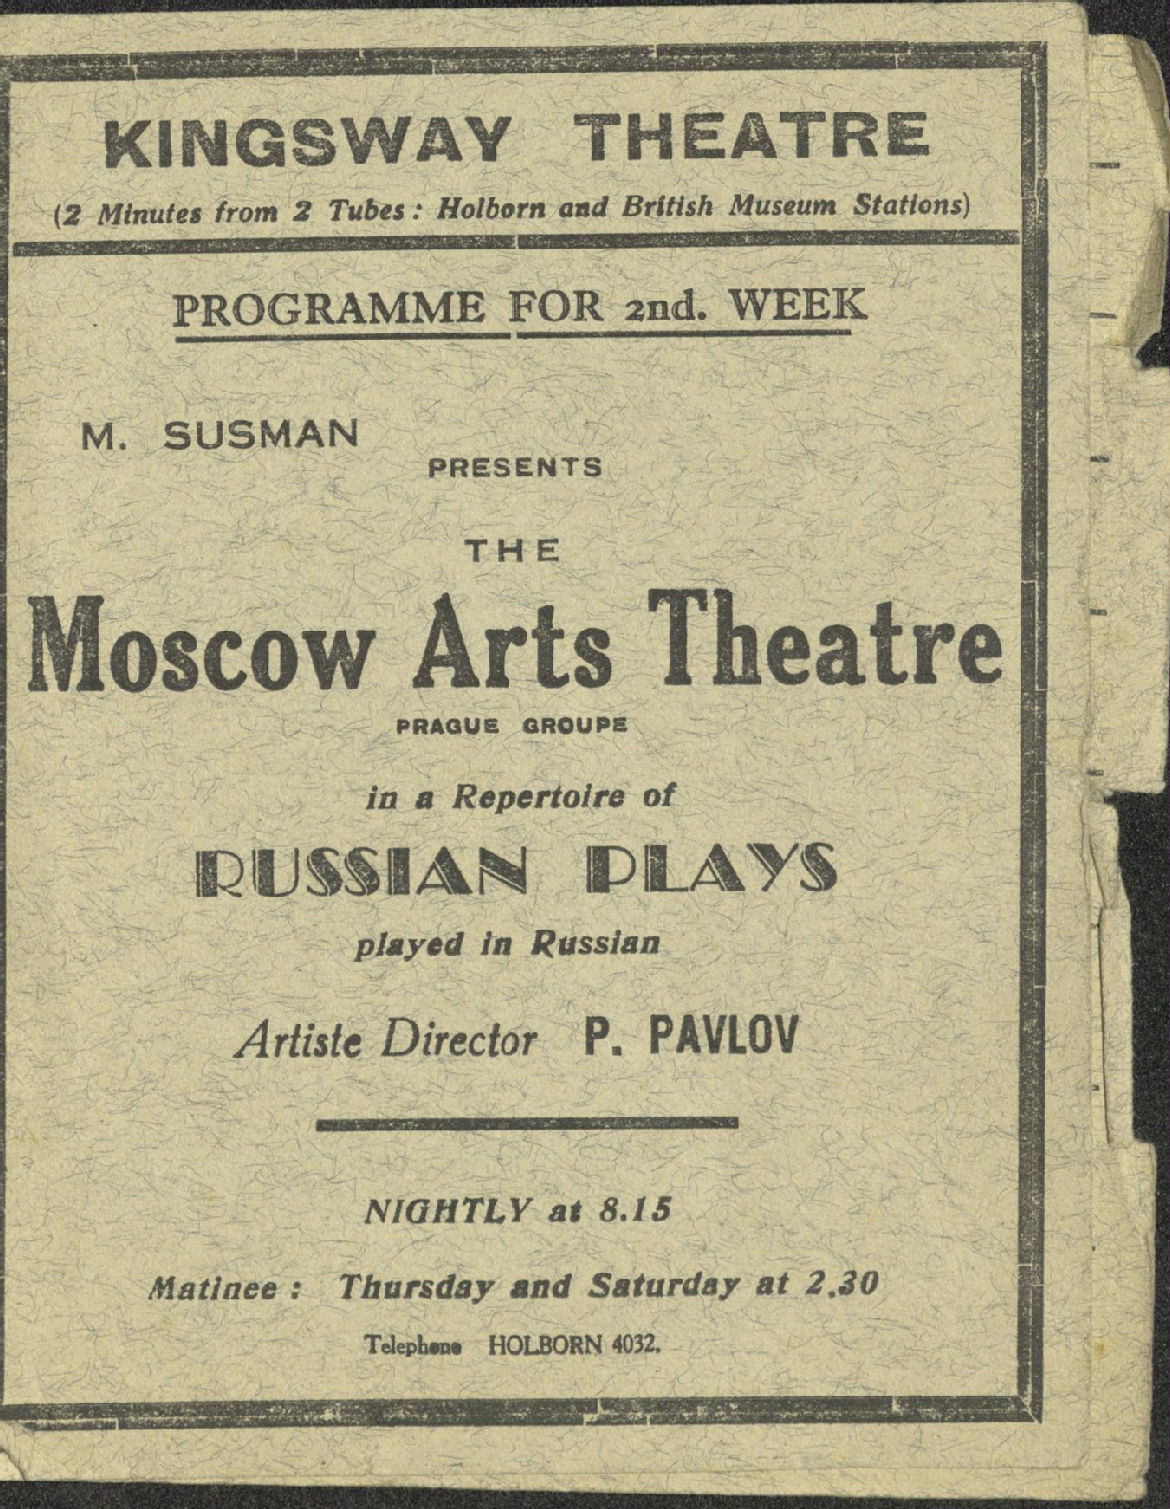 Programme for the Moscow Arts Theatre in London